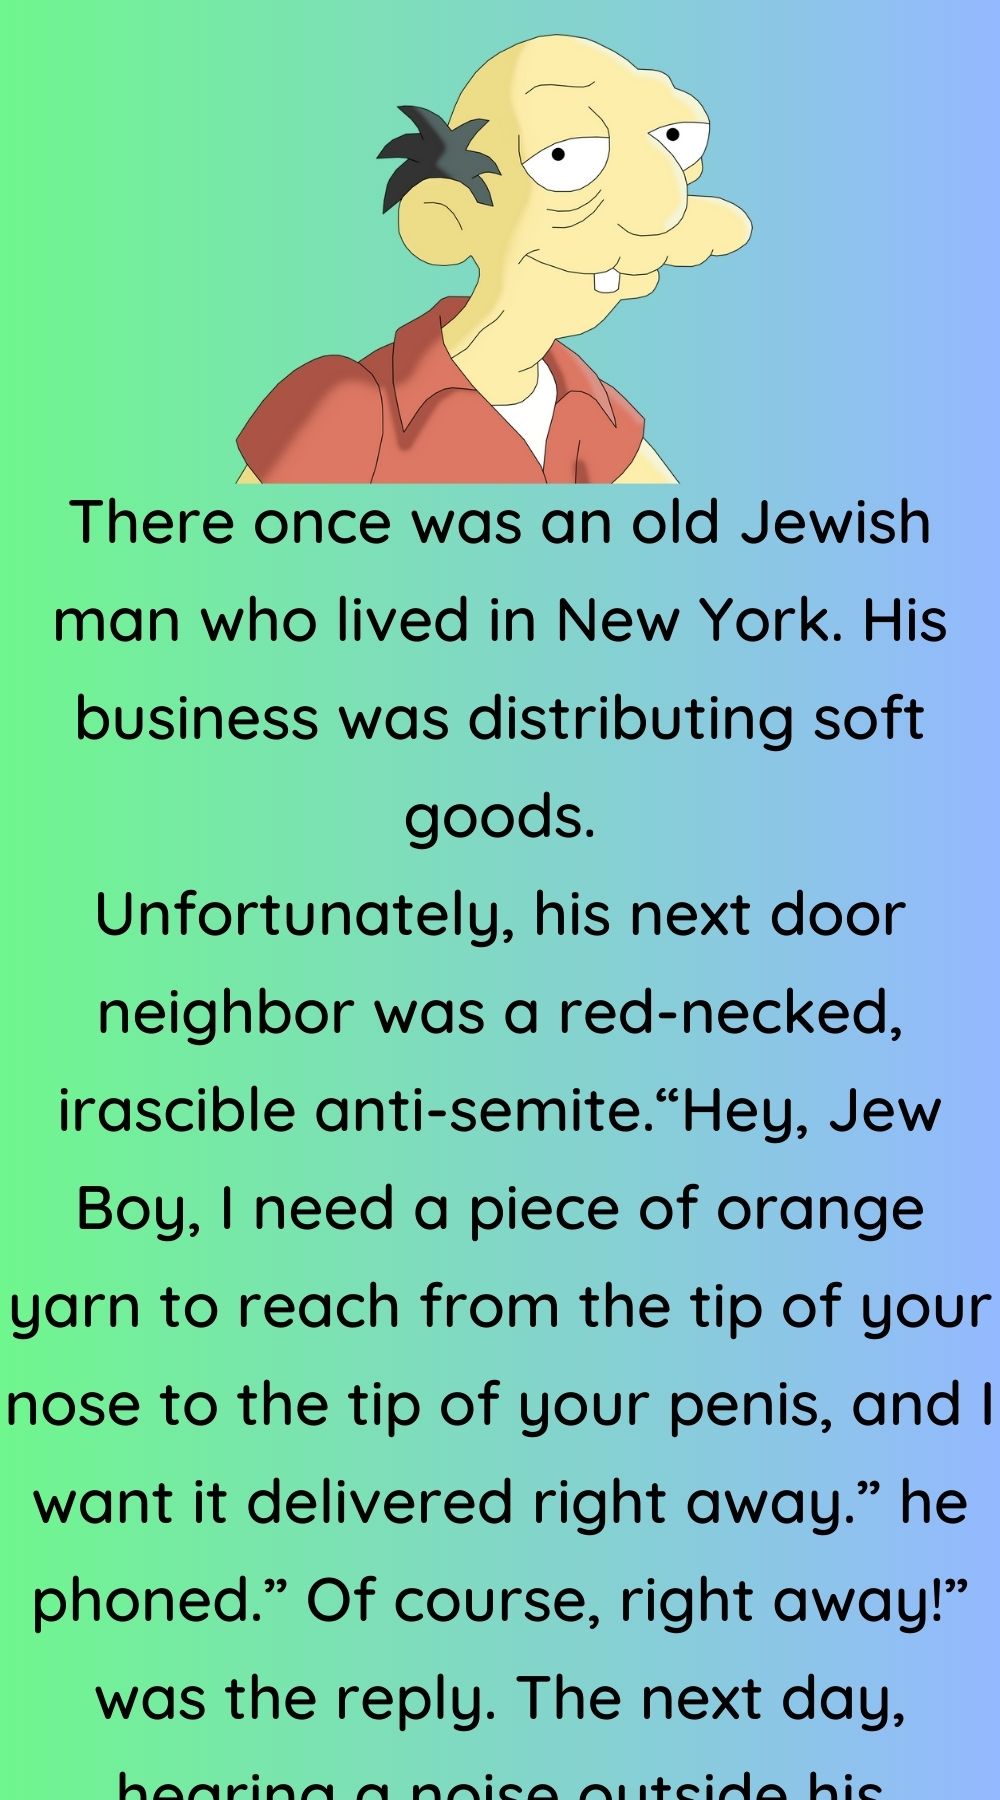 There once was an old Jewish man 